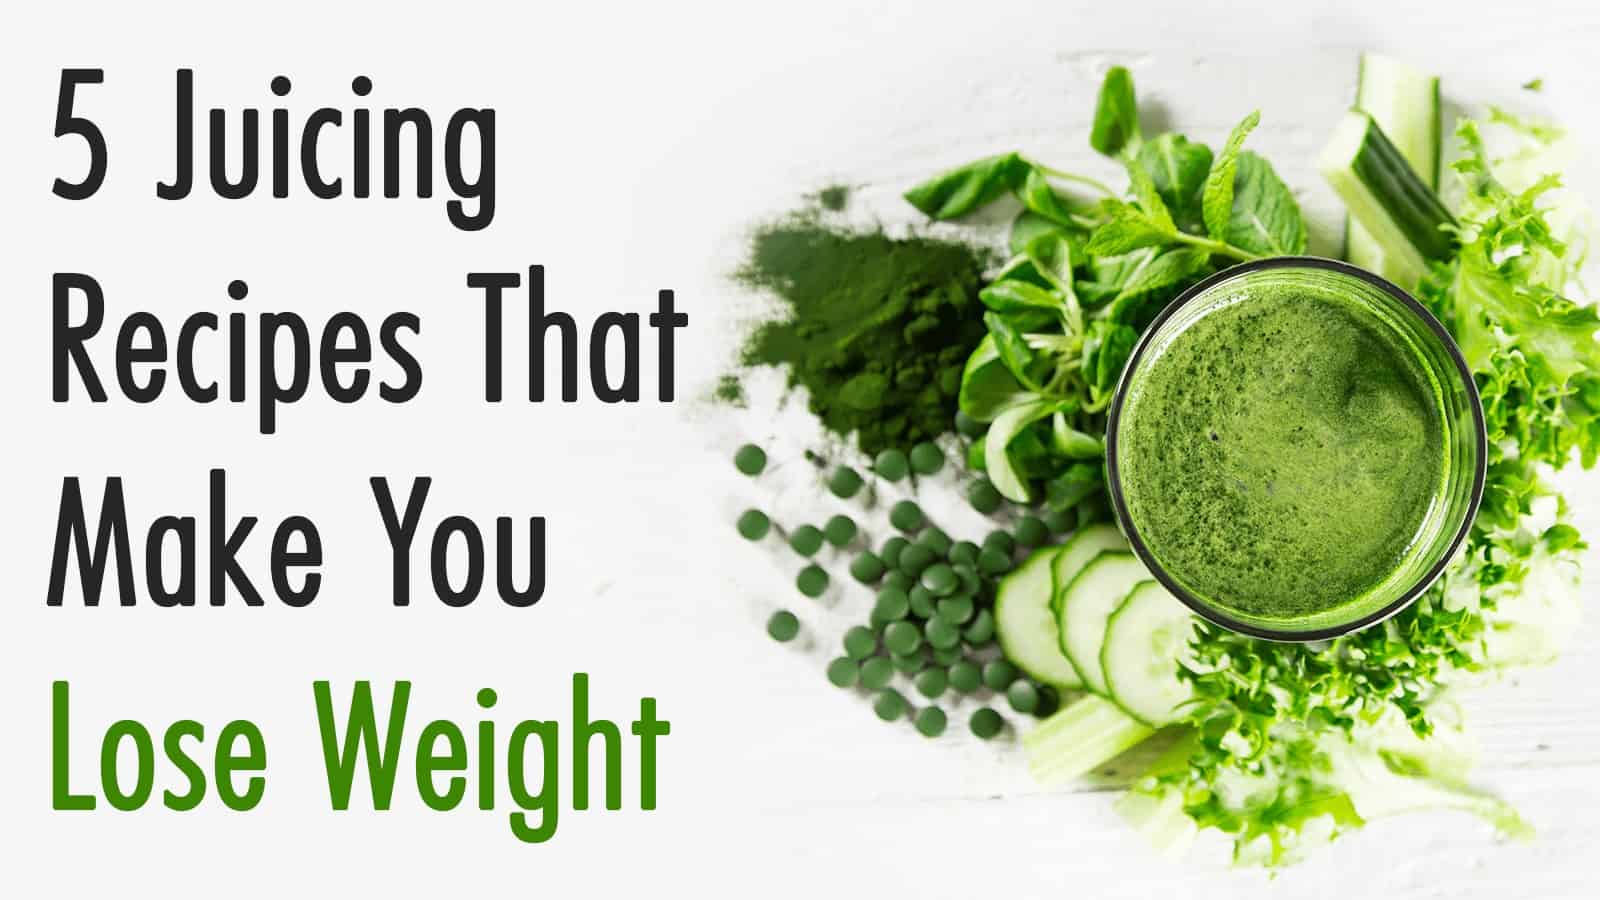 5 Juicing Recipes That Make You Lose Weight